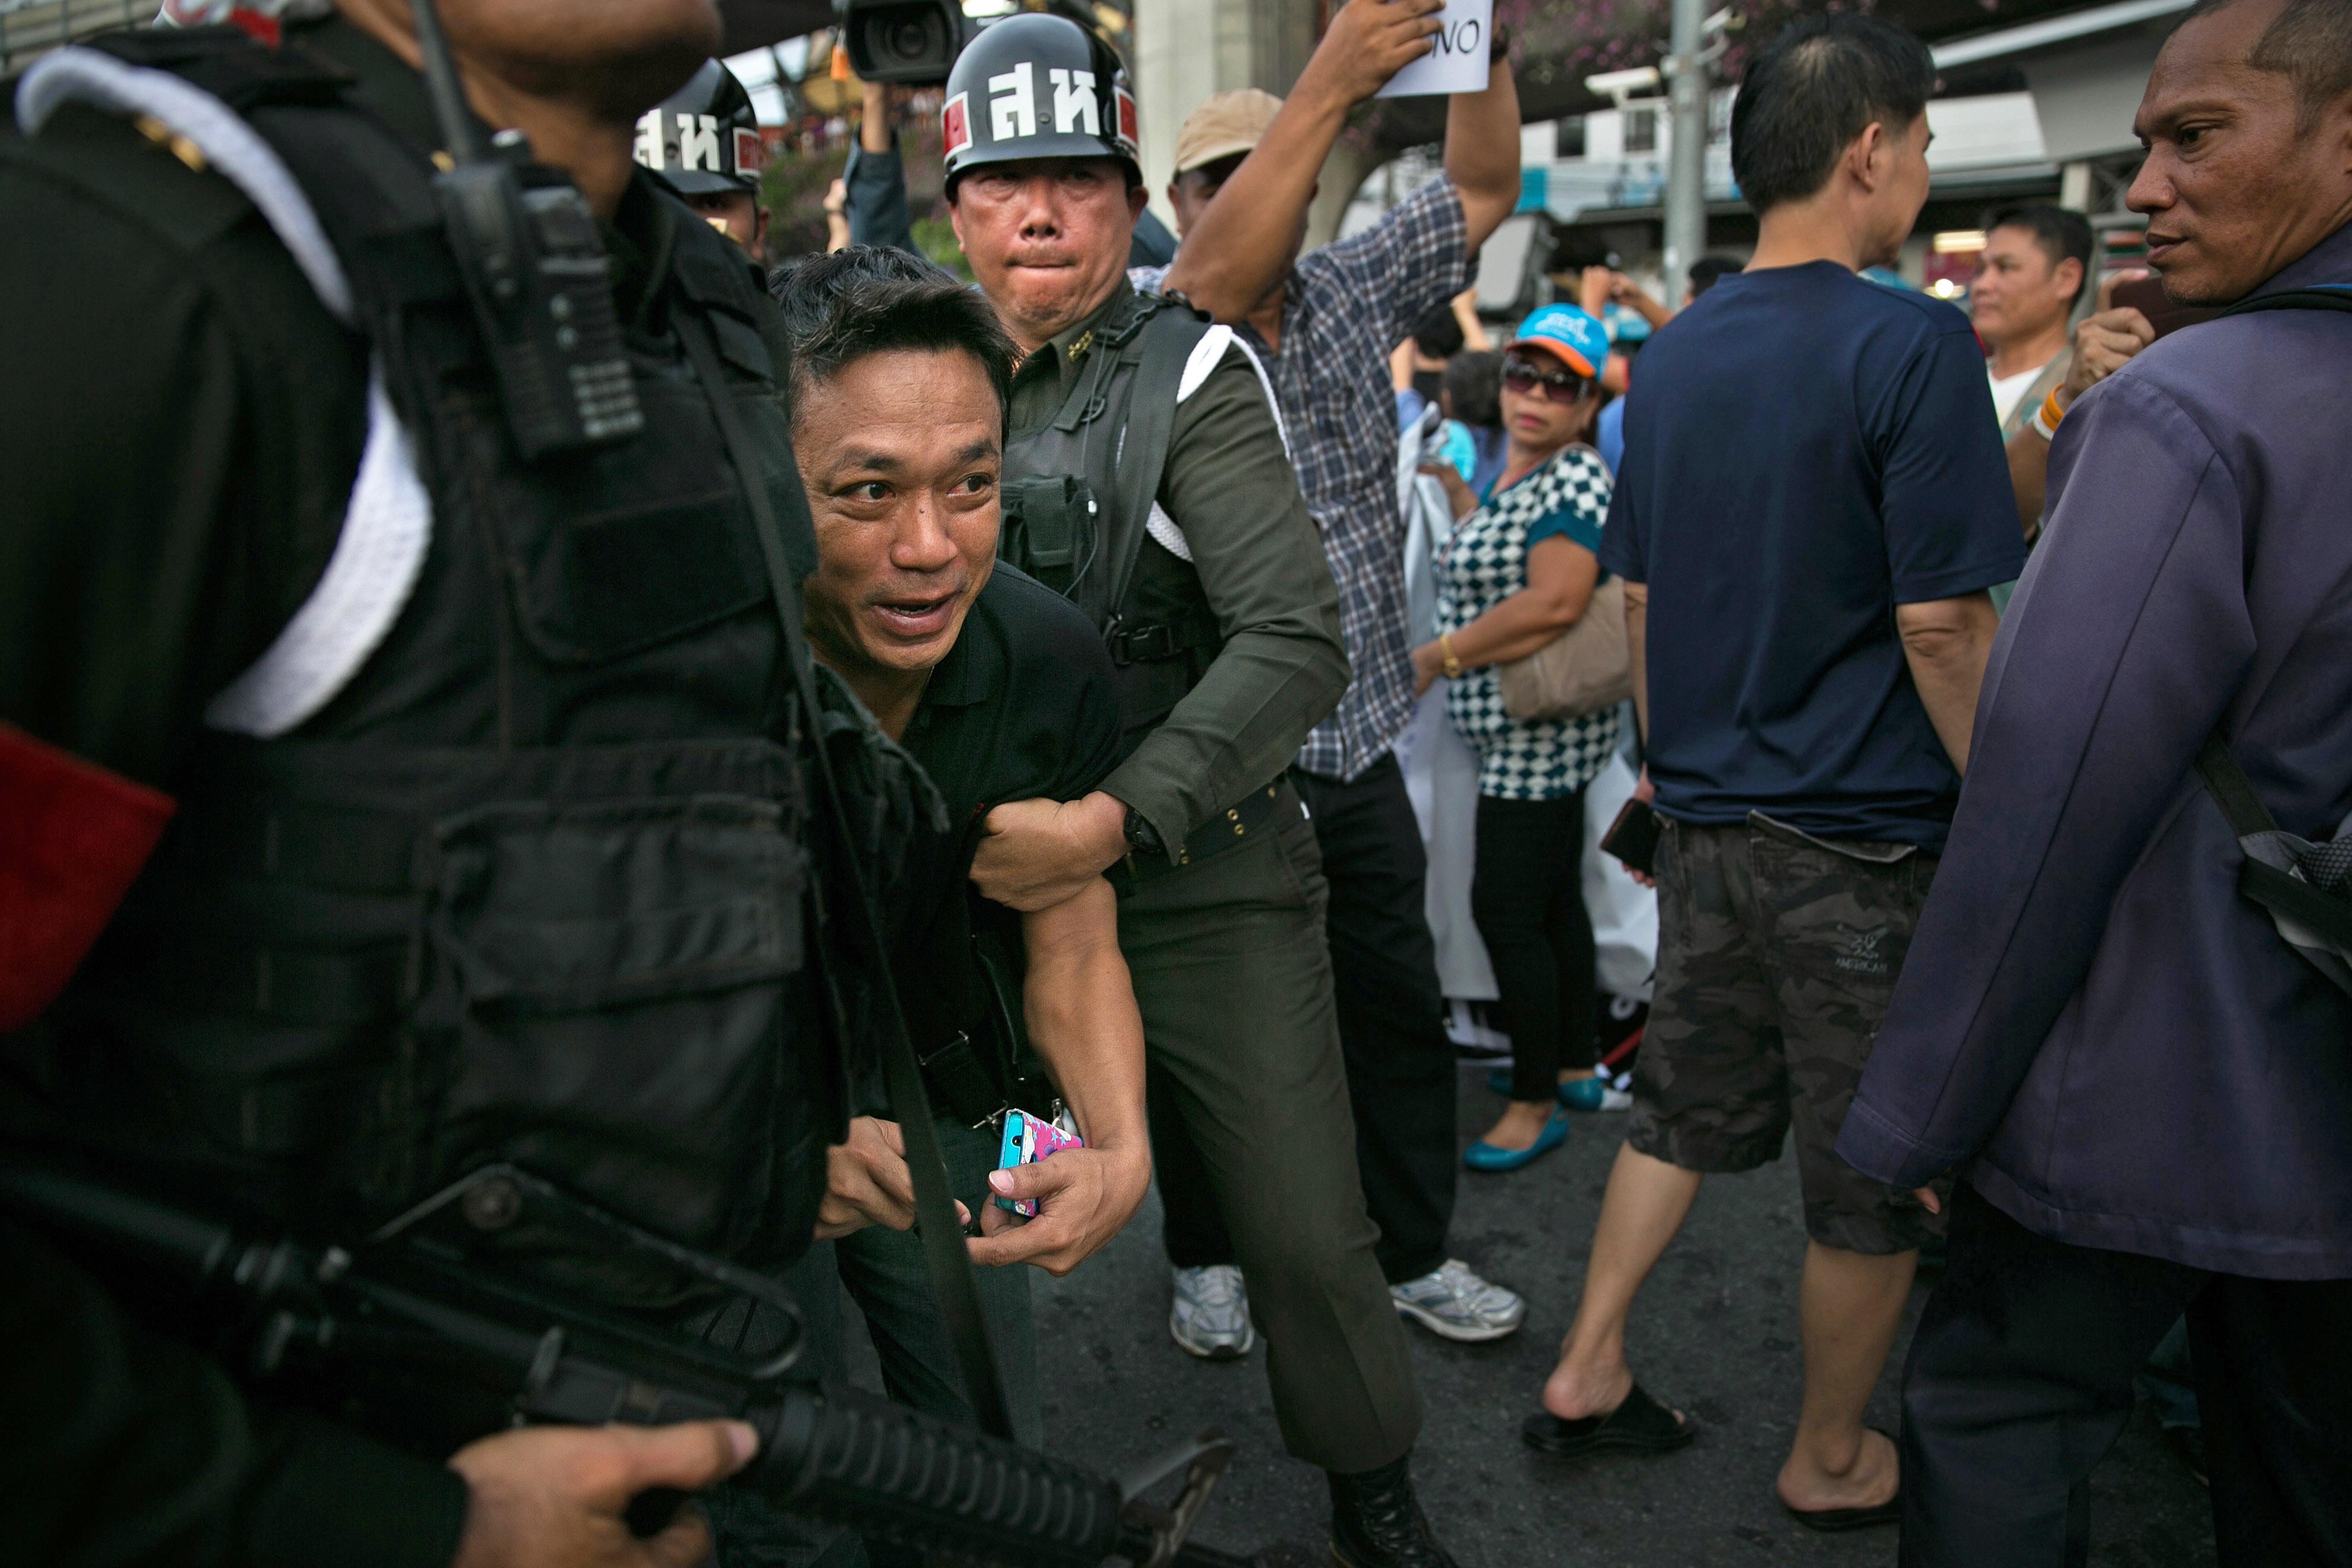 Thai military officers arrest a protester as tensions rise during anti coup protests in Bangkok on May 28, 2014 (Paula Bronstein—Getty Images)